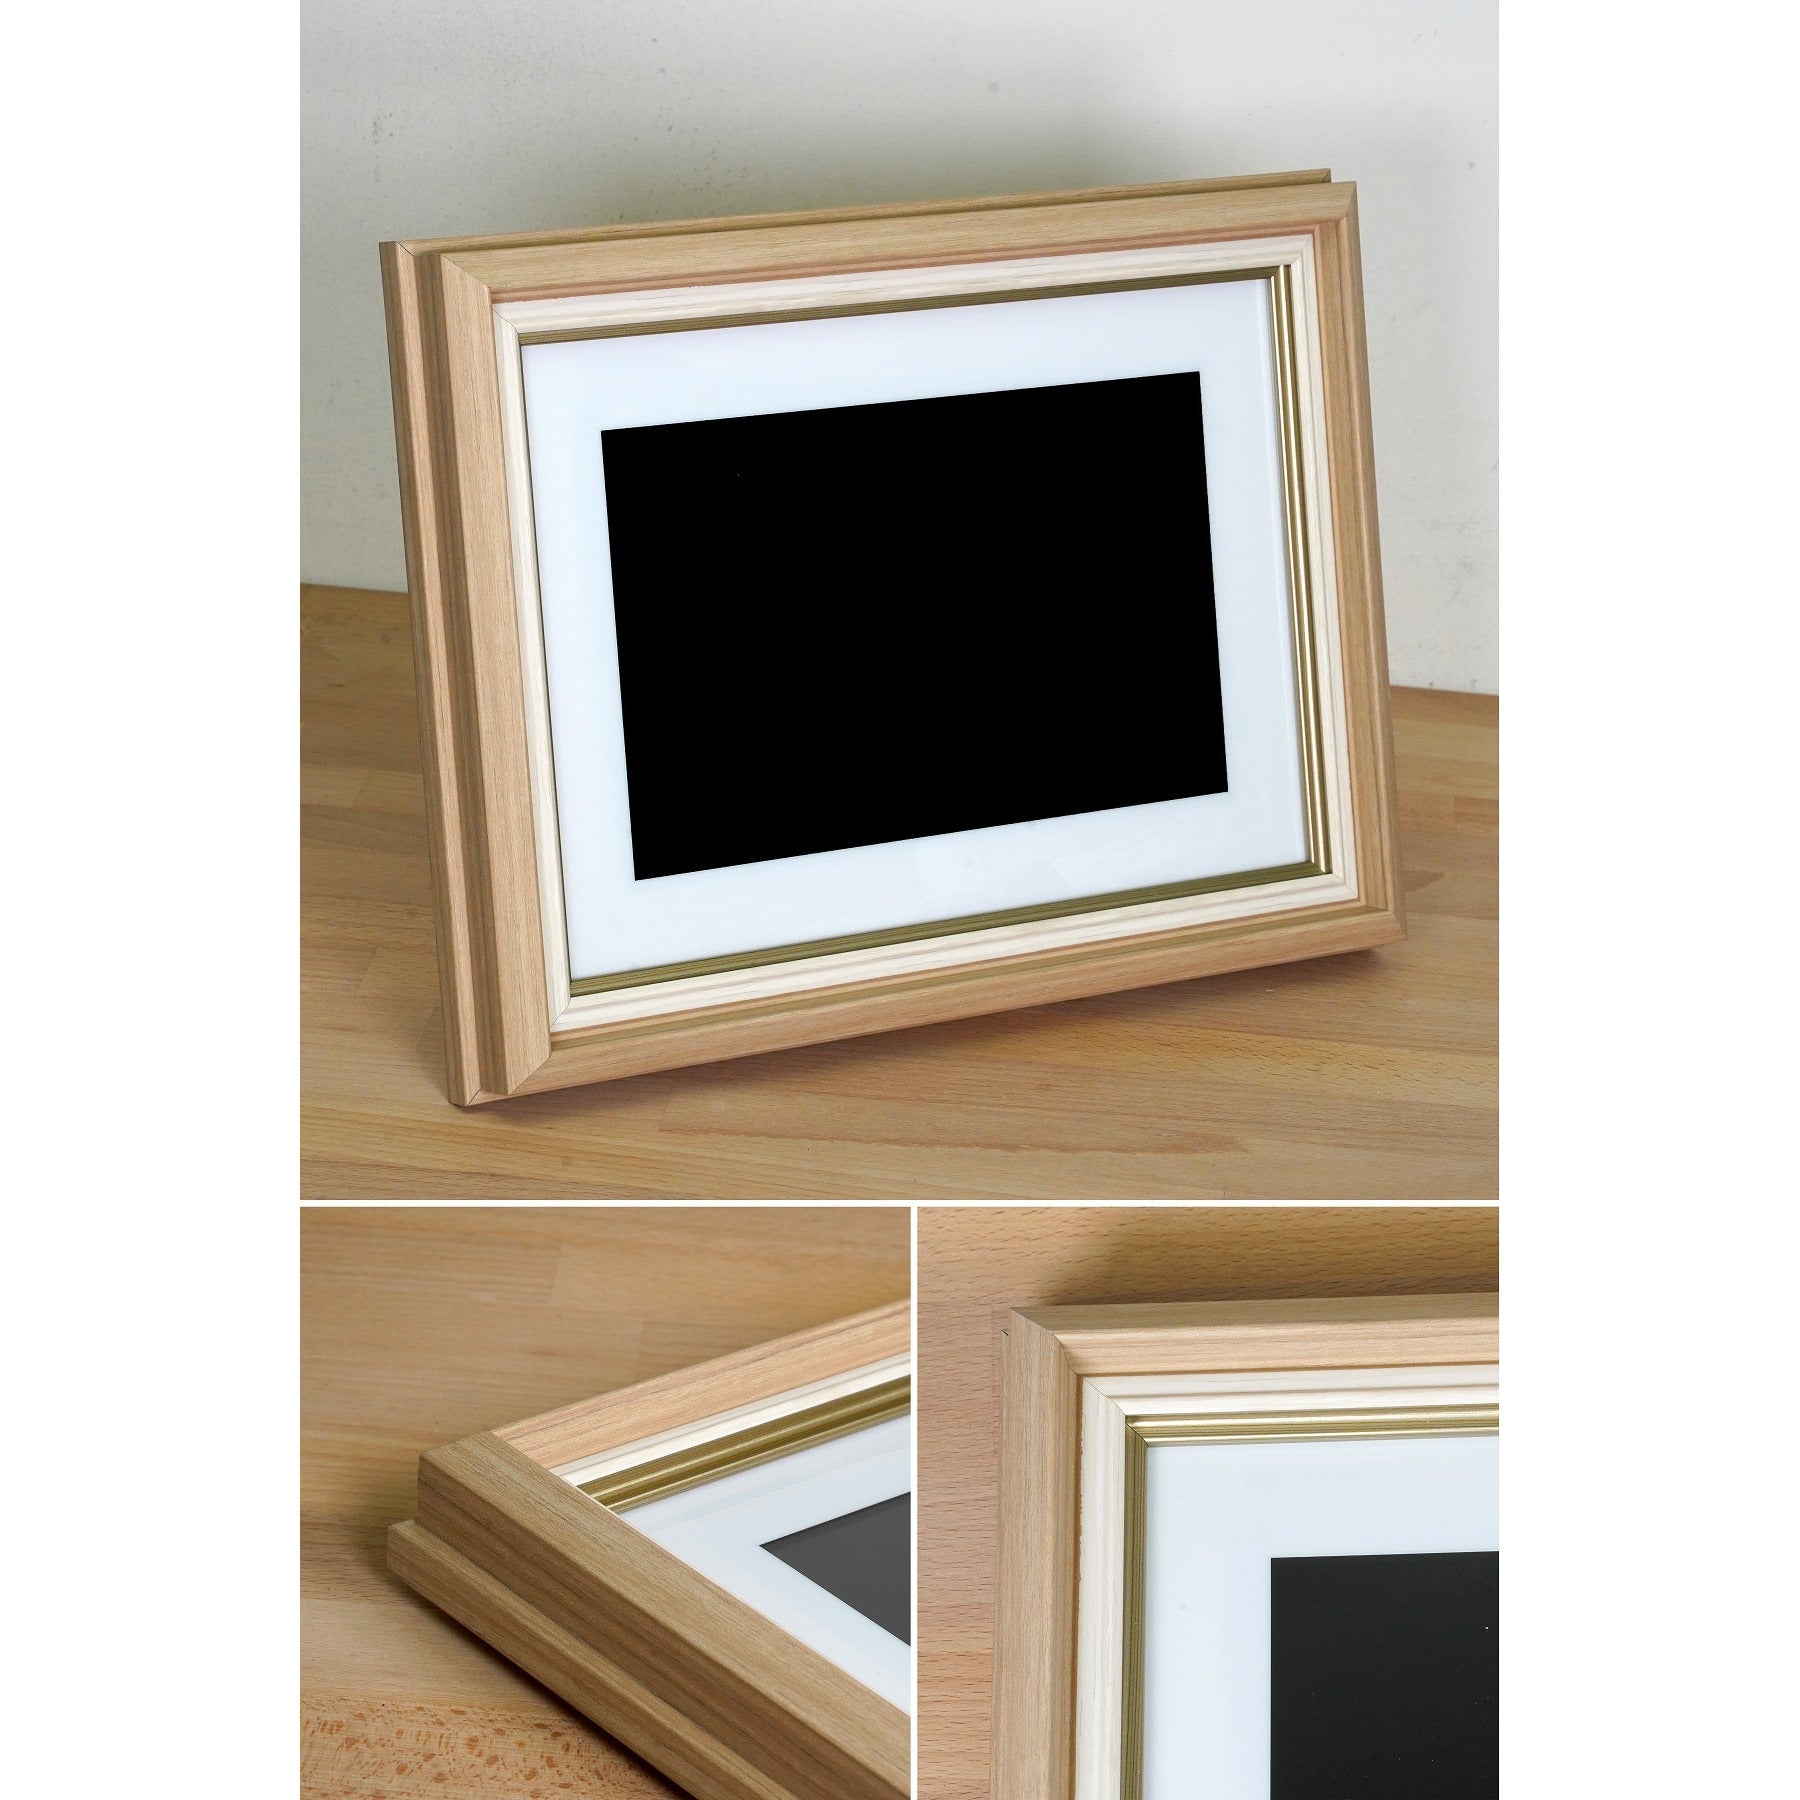 Two Tone Oak with Gold Bevel  Frame Moulding